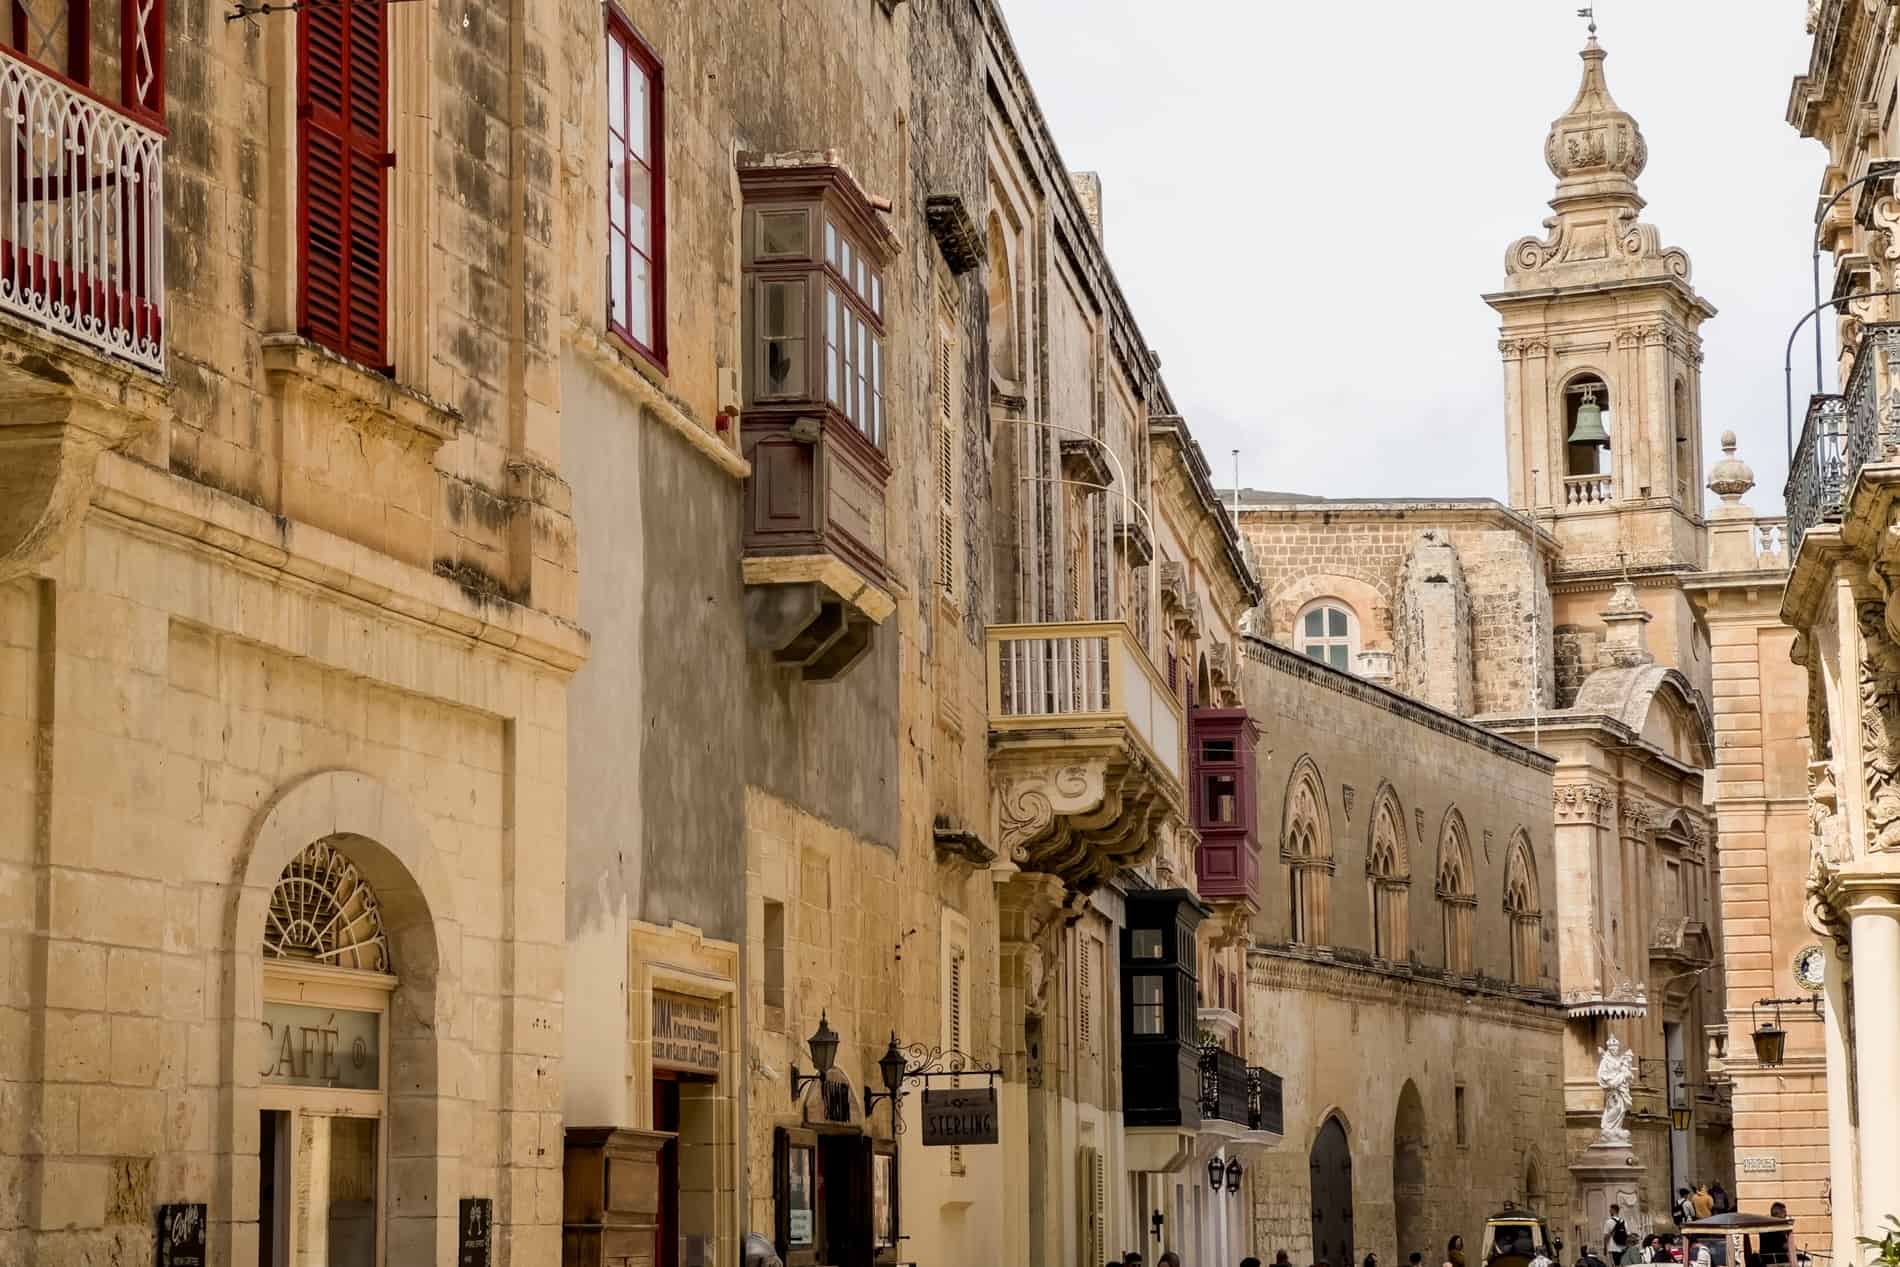 A row of honey-coloured limestone buildings in Mdina, Malta, with beautiful balconies, arched windows and towering spires. 